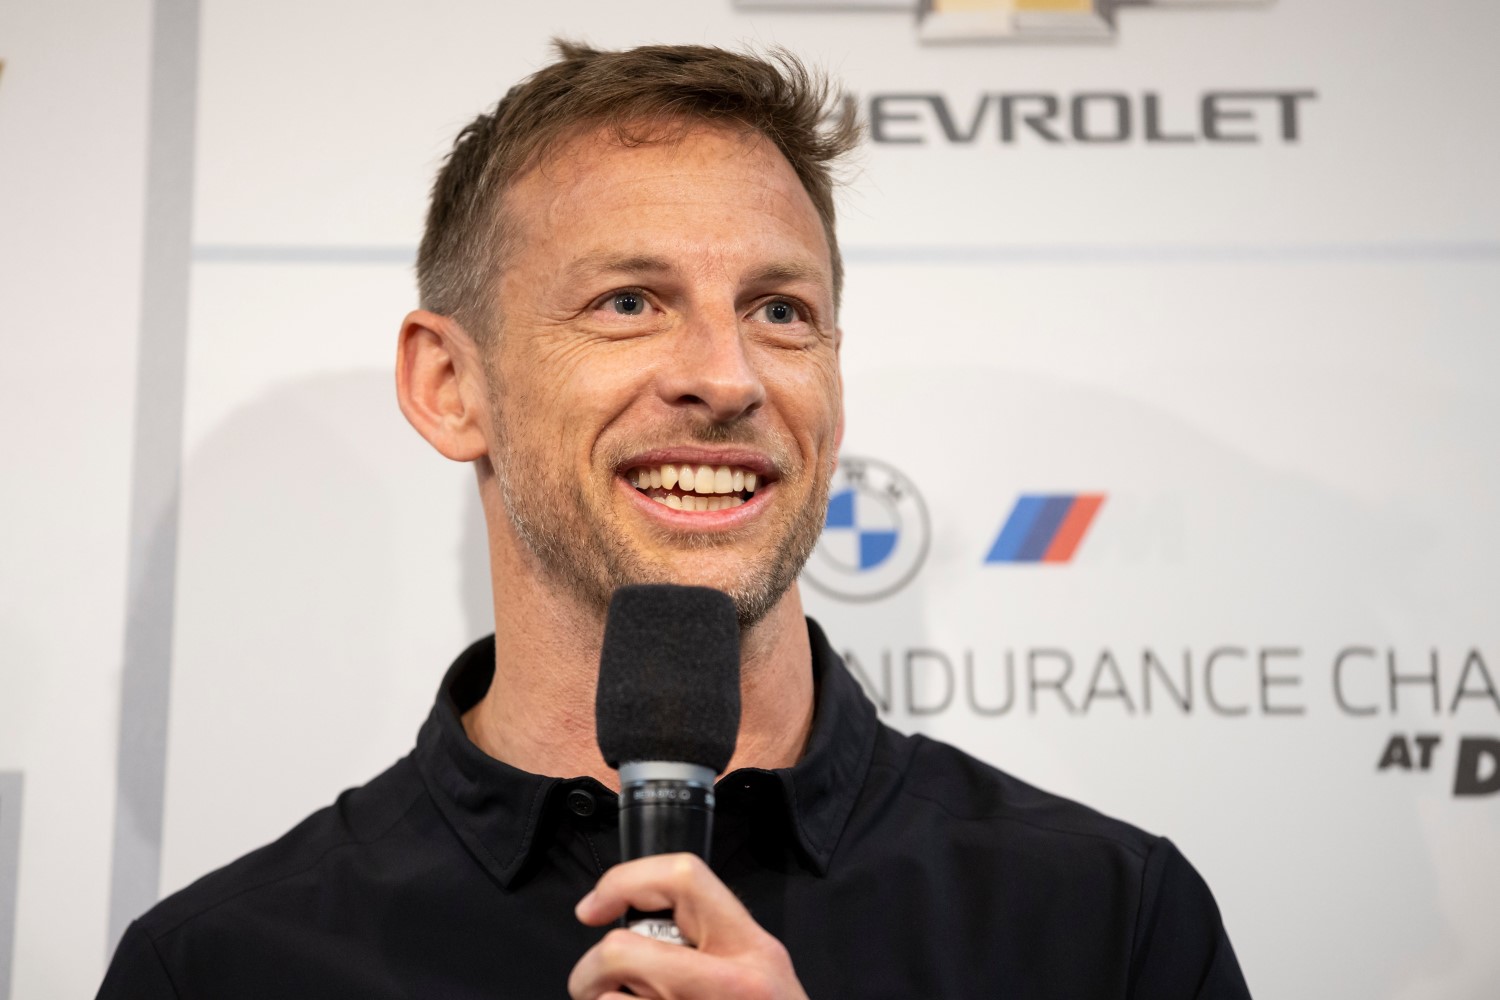 Jenson Button speaks to the Media during a press conference announcing the NASCAR Garage 56 driver lineup for entry in 2023 Le mans before the Rolex 24 at Daytona International Speedway on January 28, 2023 in Daytona Beach, Florida. (Photo by James Gilbert/Getty Images)